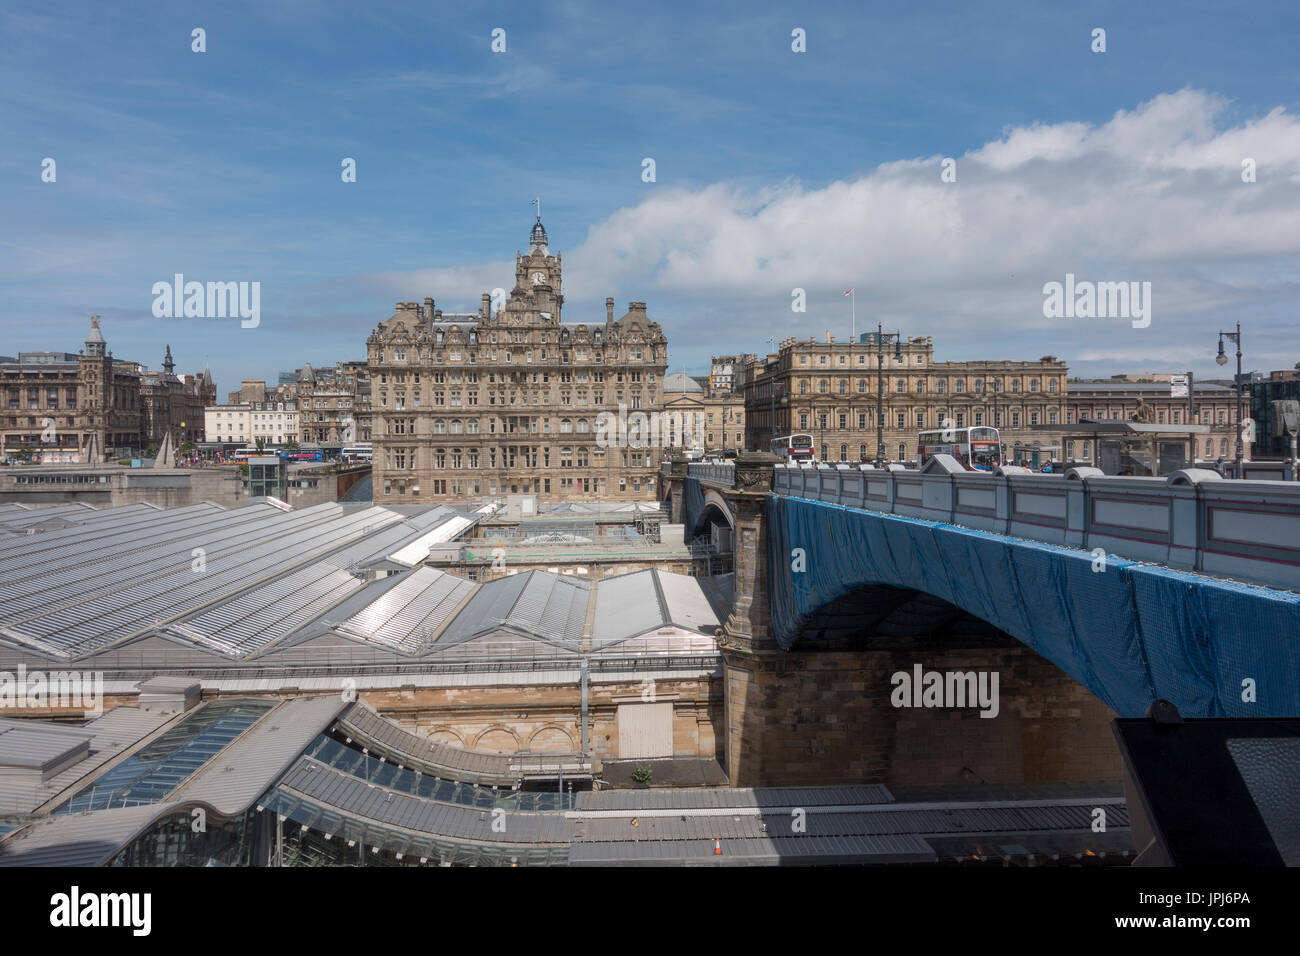 The Balmoral Hotel Seen From Old Town Edinburgh, Across The Roof Of Waverley Station Scotland, Part Of The Rocco Forte Hotels Group Stock Photo